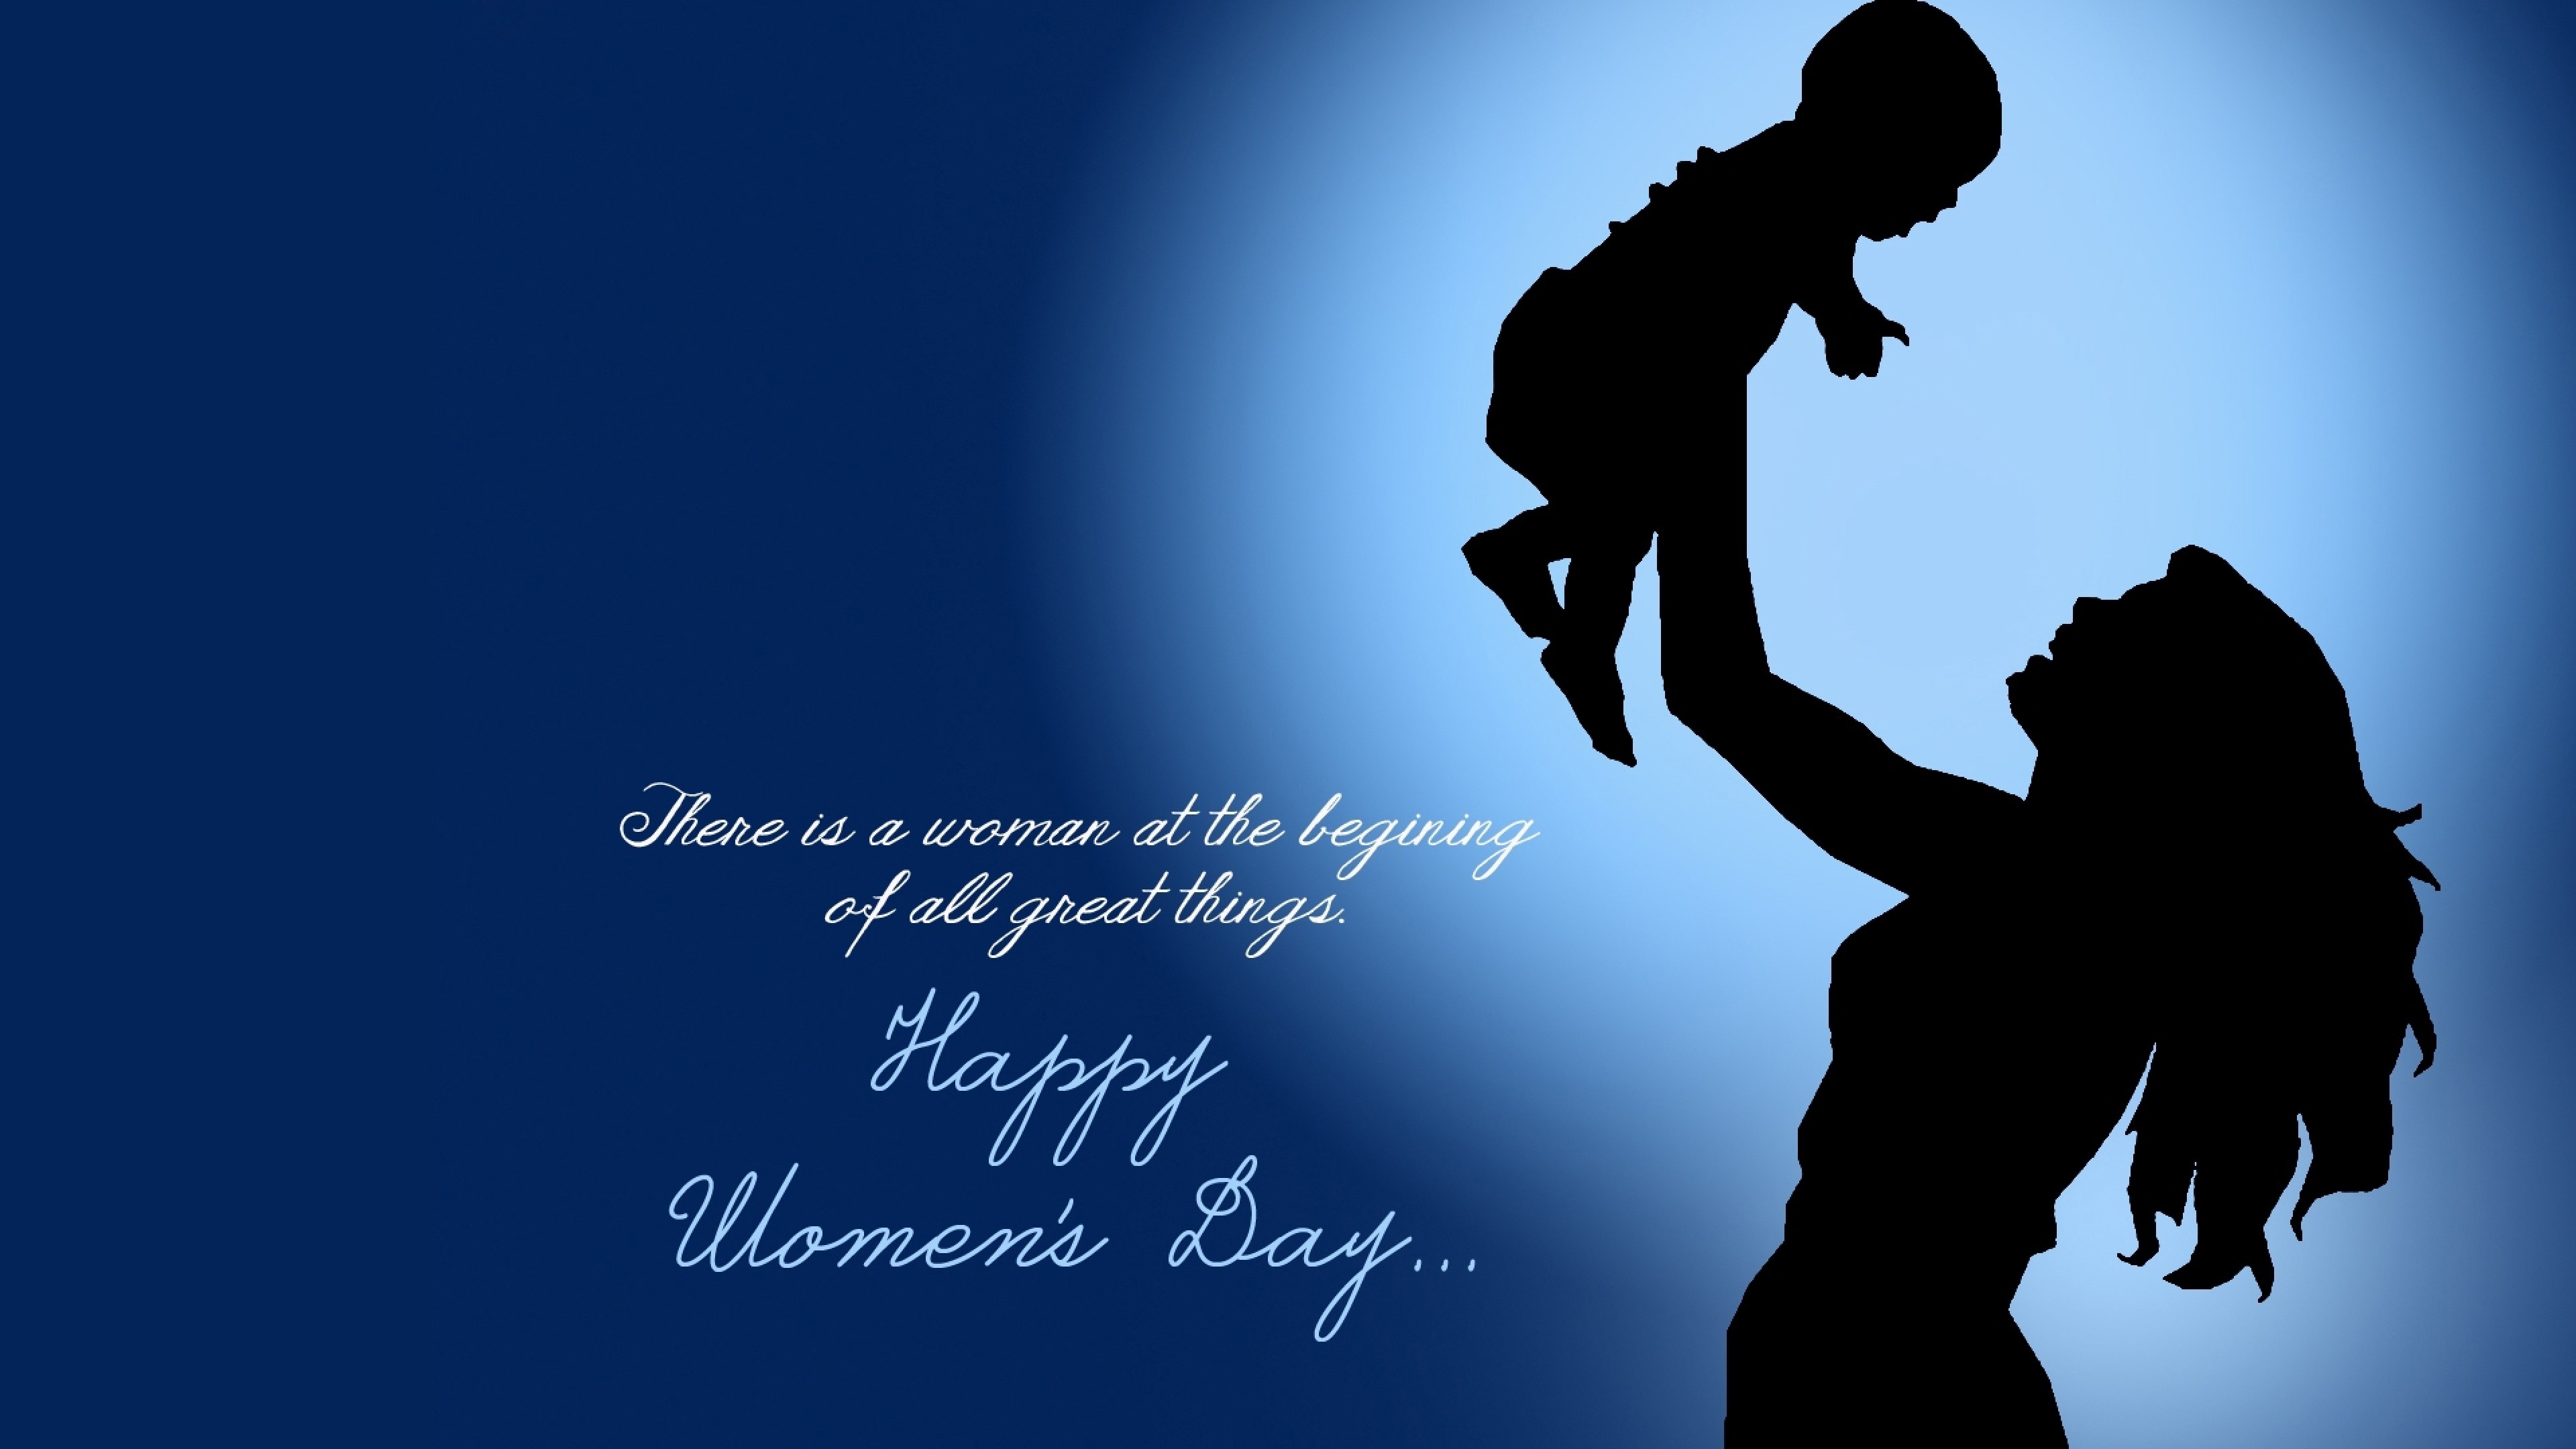 3840x2160 Happy Womens Day Wallpapers: Find best latest Happy Womens Day Wallpapers  in HD for your